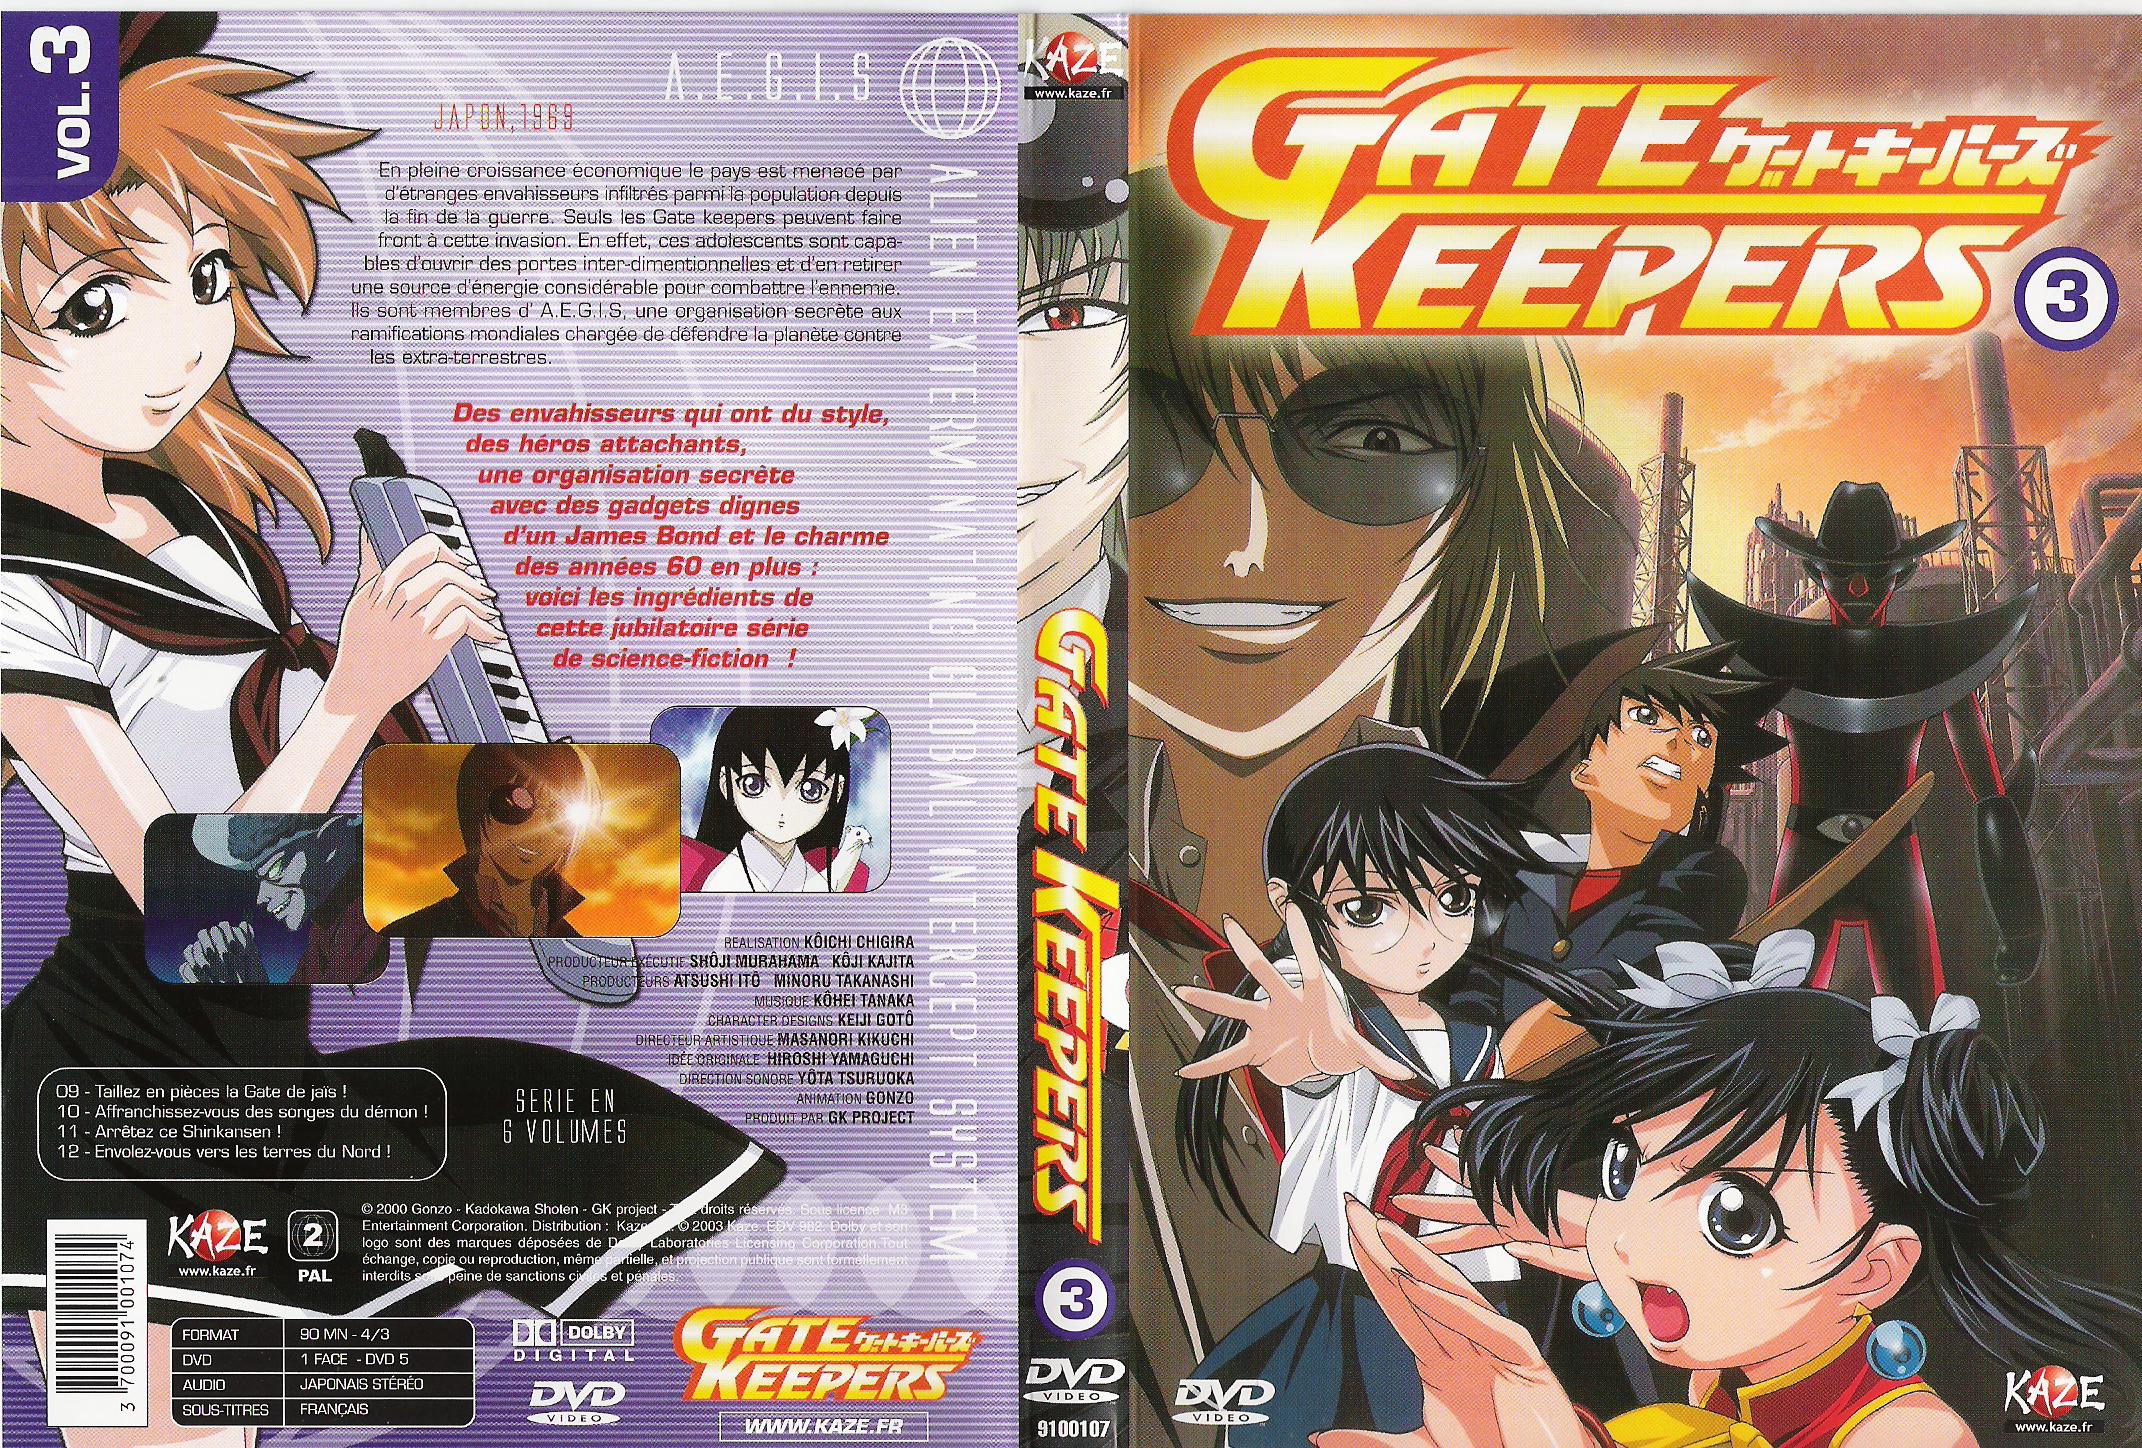 Jaquette DVD Gate Keepers DVD 3